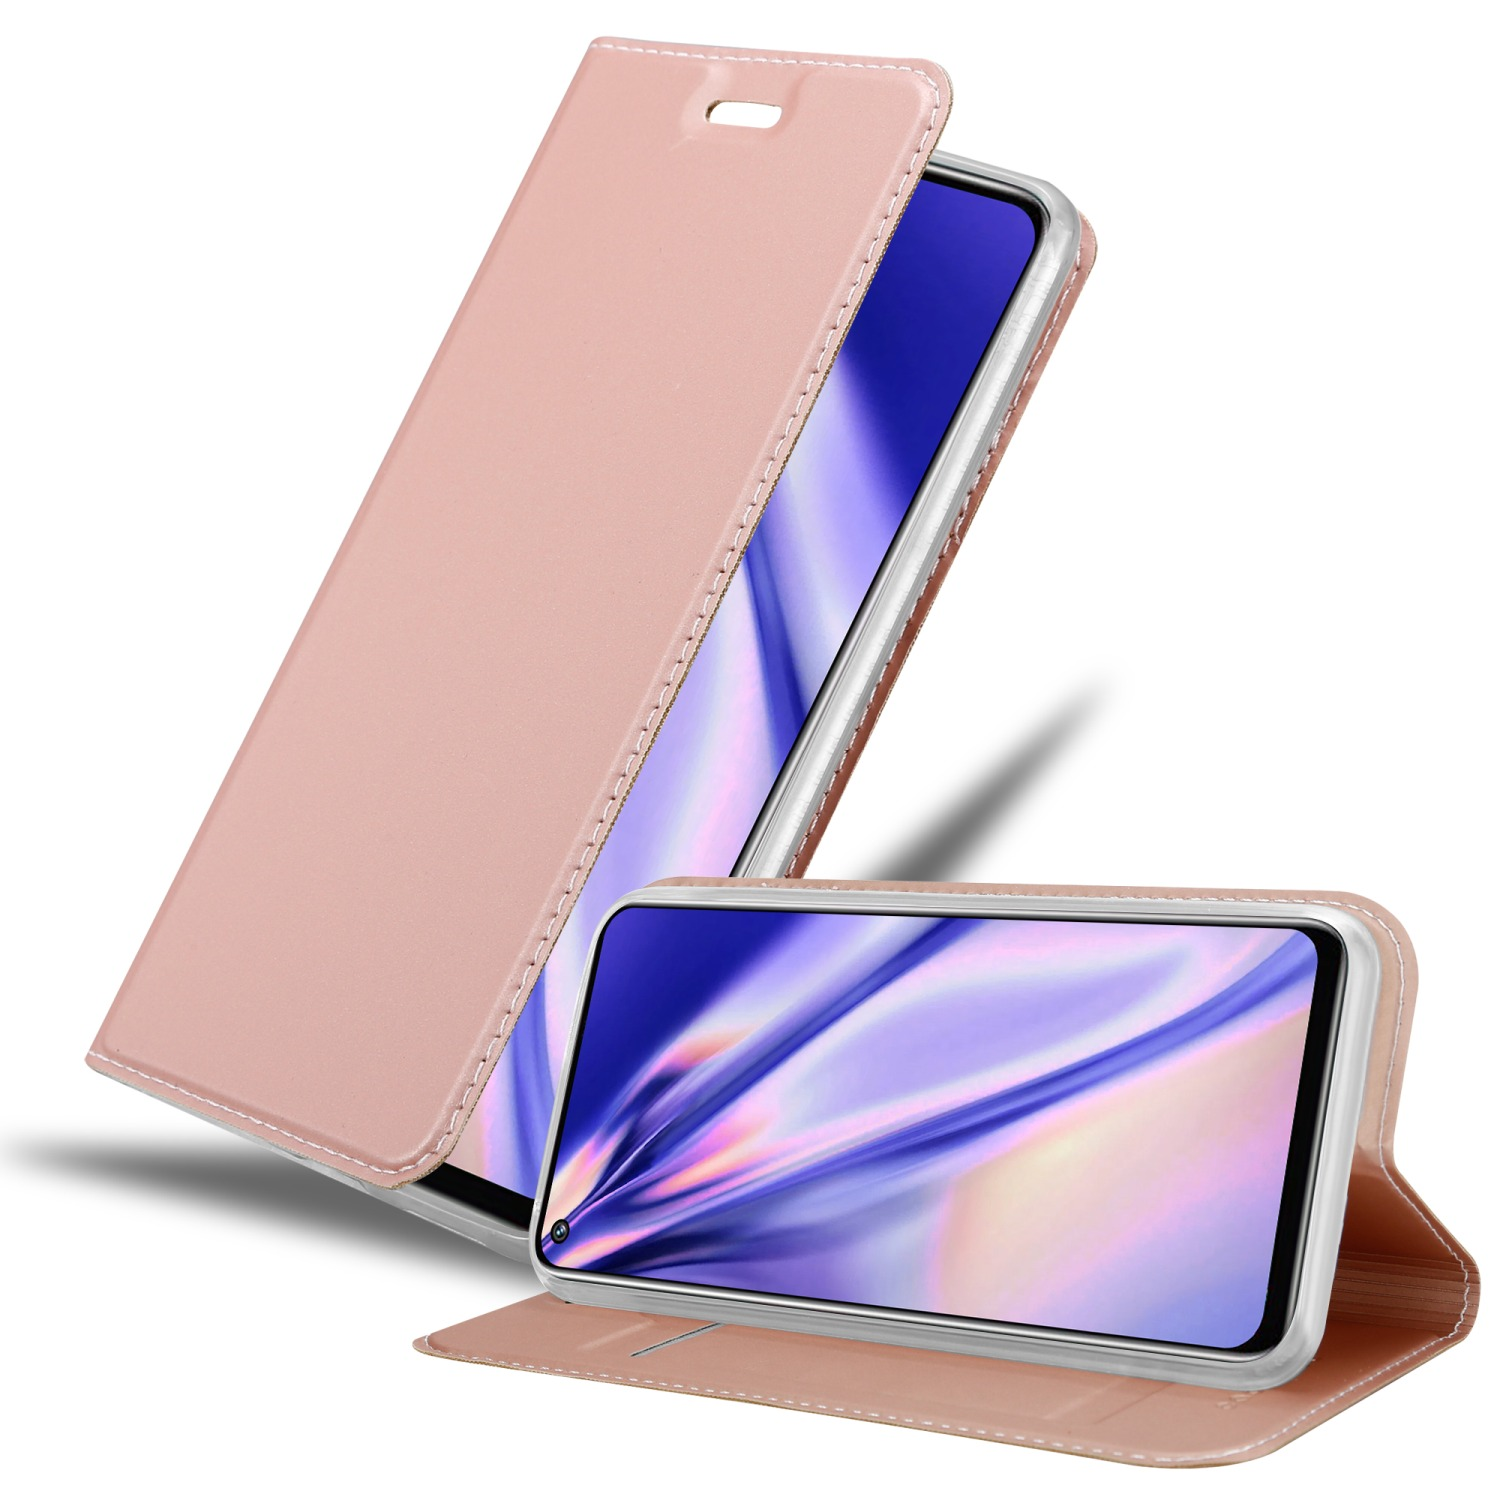 Classy / / Bookcover, 9 CE 5G, Handyhülle V25 Nord GOLD Q5 / Style, Realme, Book 2 PRO 9 CLASSY OnePlus ROSÉ LITE CADORABO / 5G